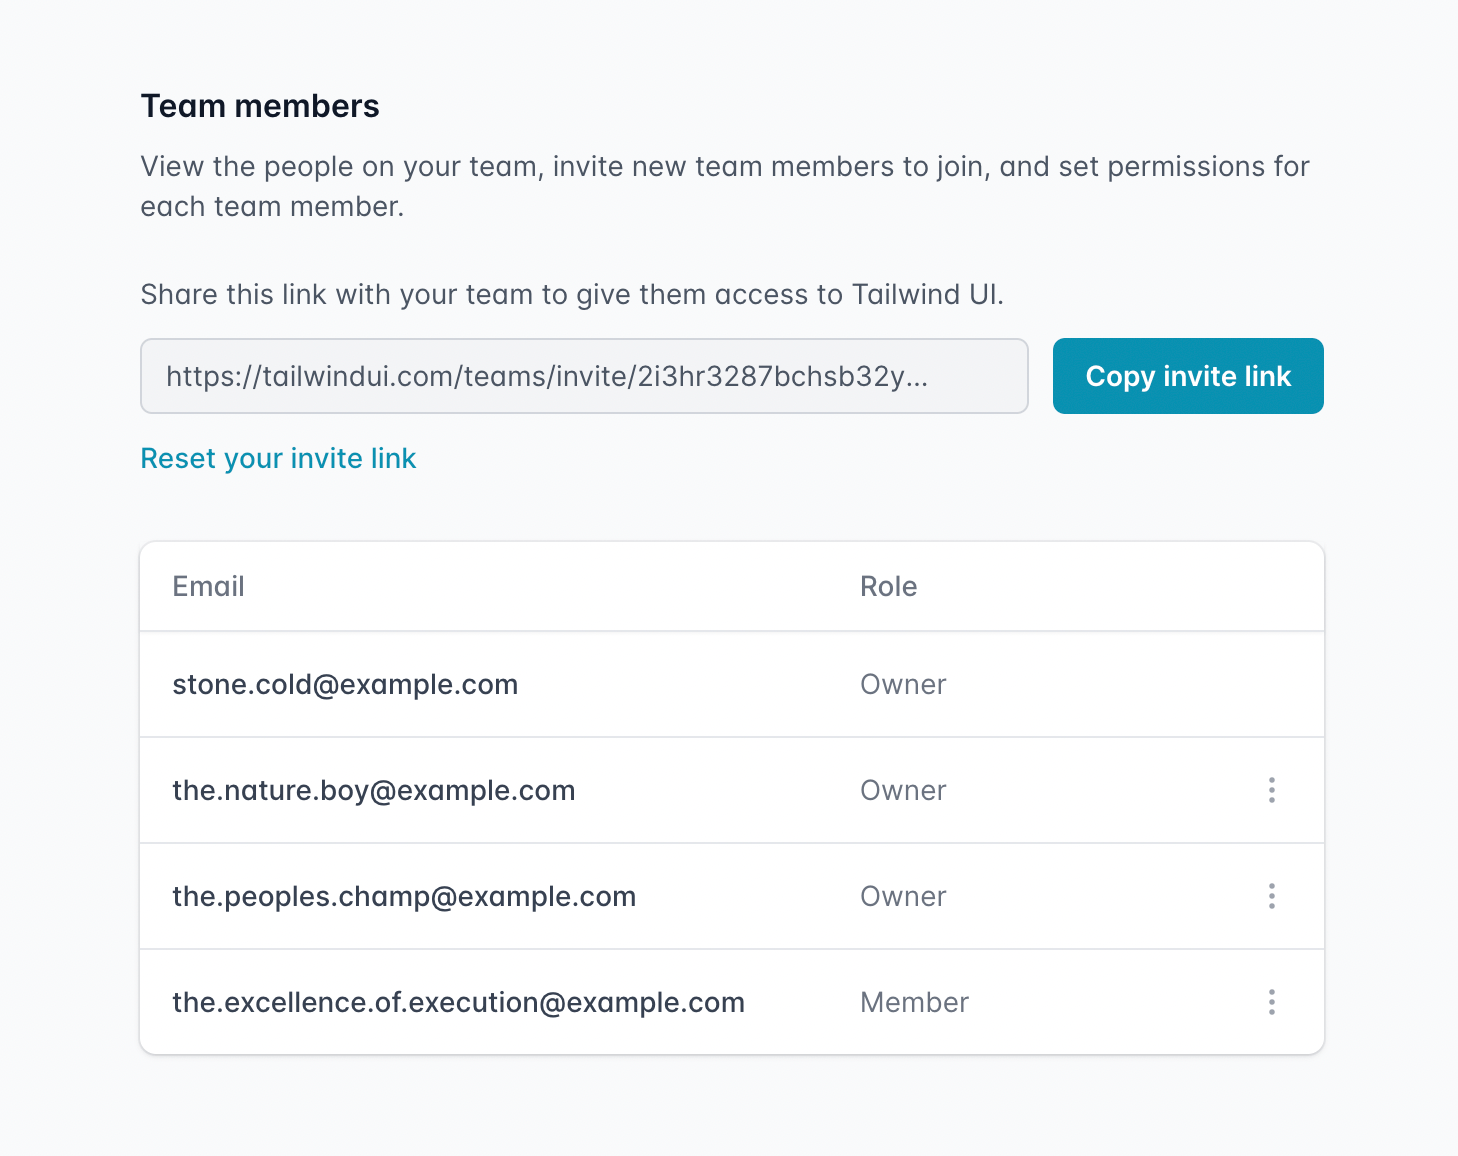 Interface with a copyable invite URL and list of team members